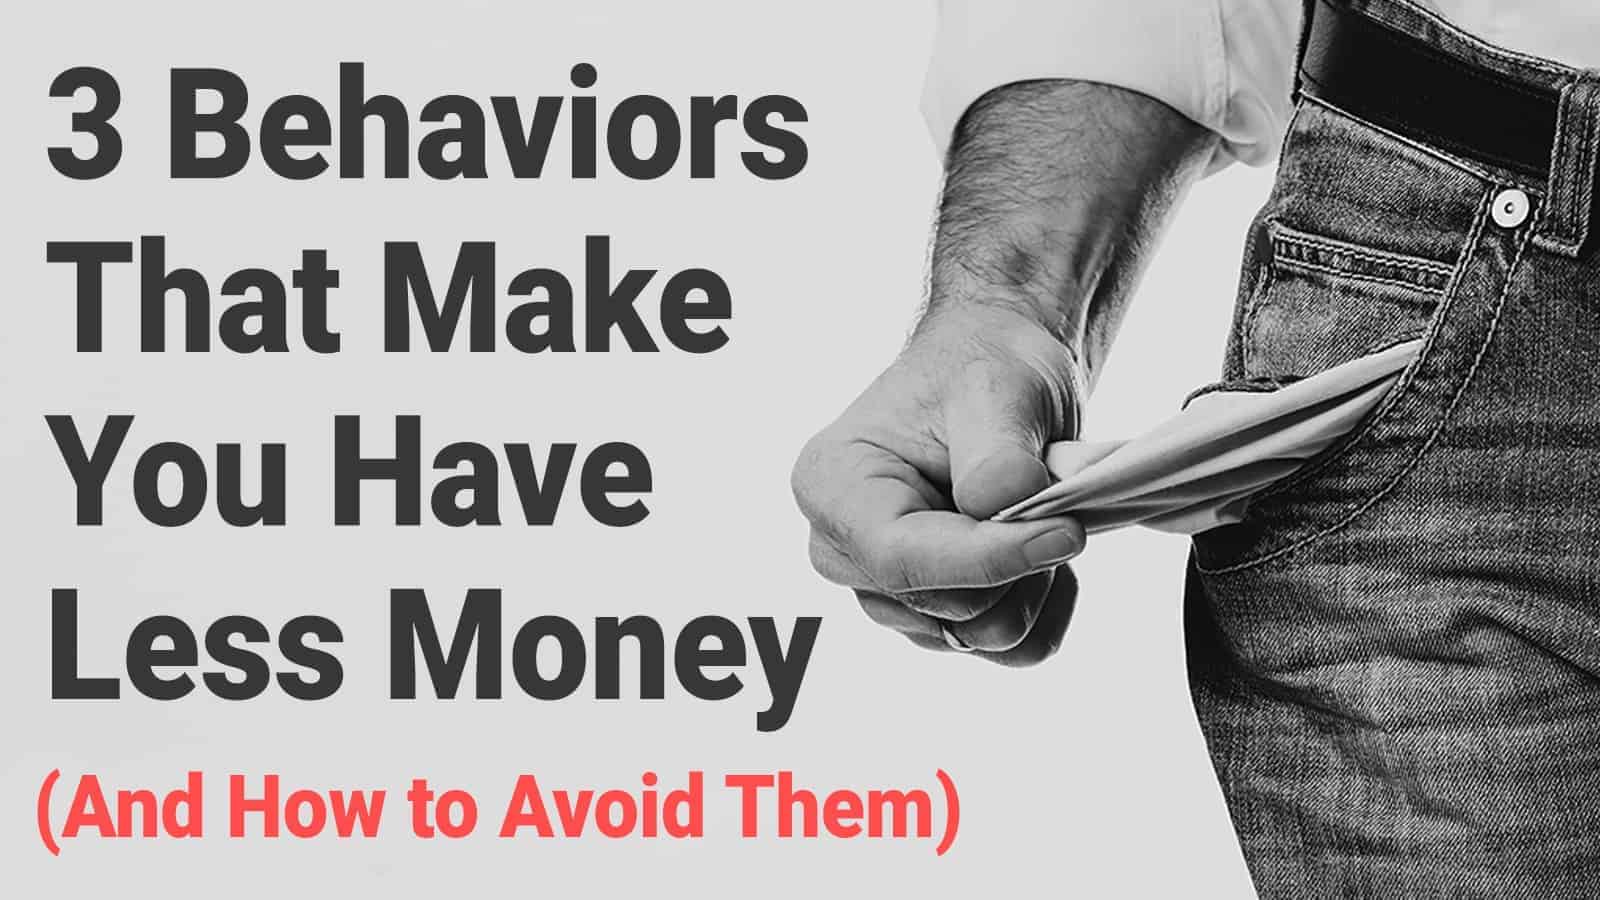 3 Behaviors That Make You Have Less Money (And How to Avoid Them)